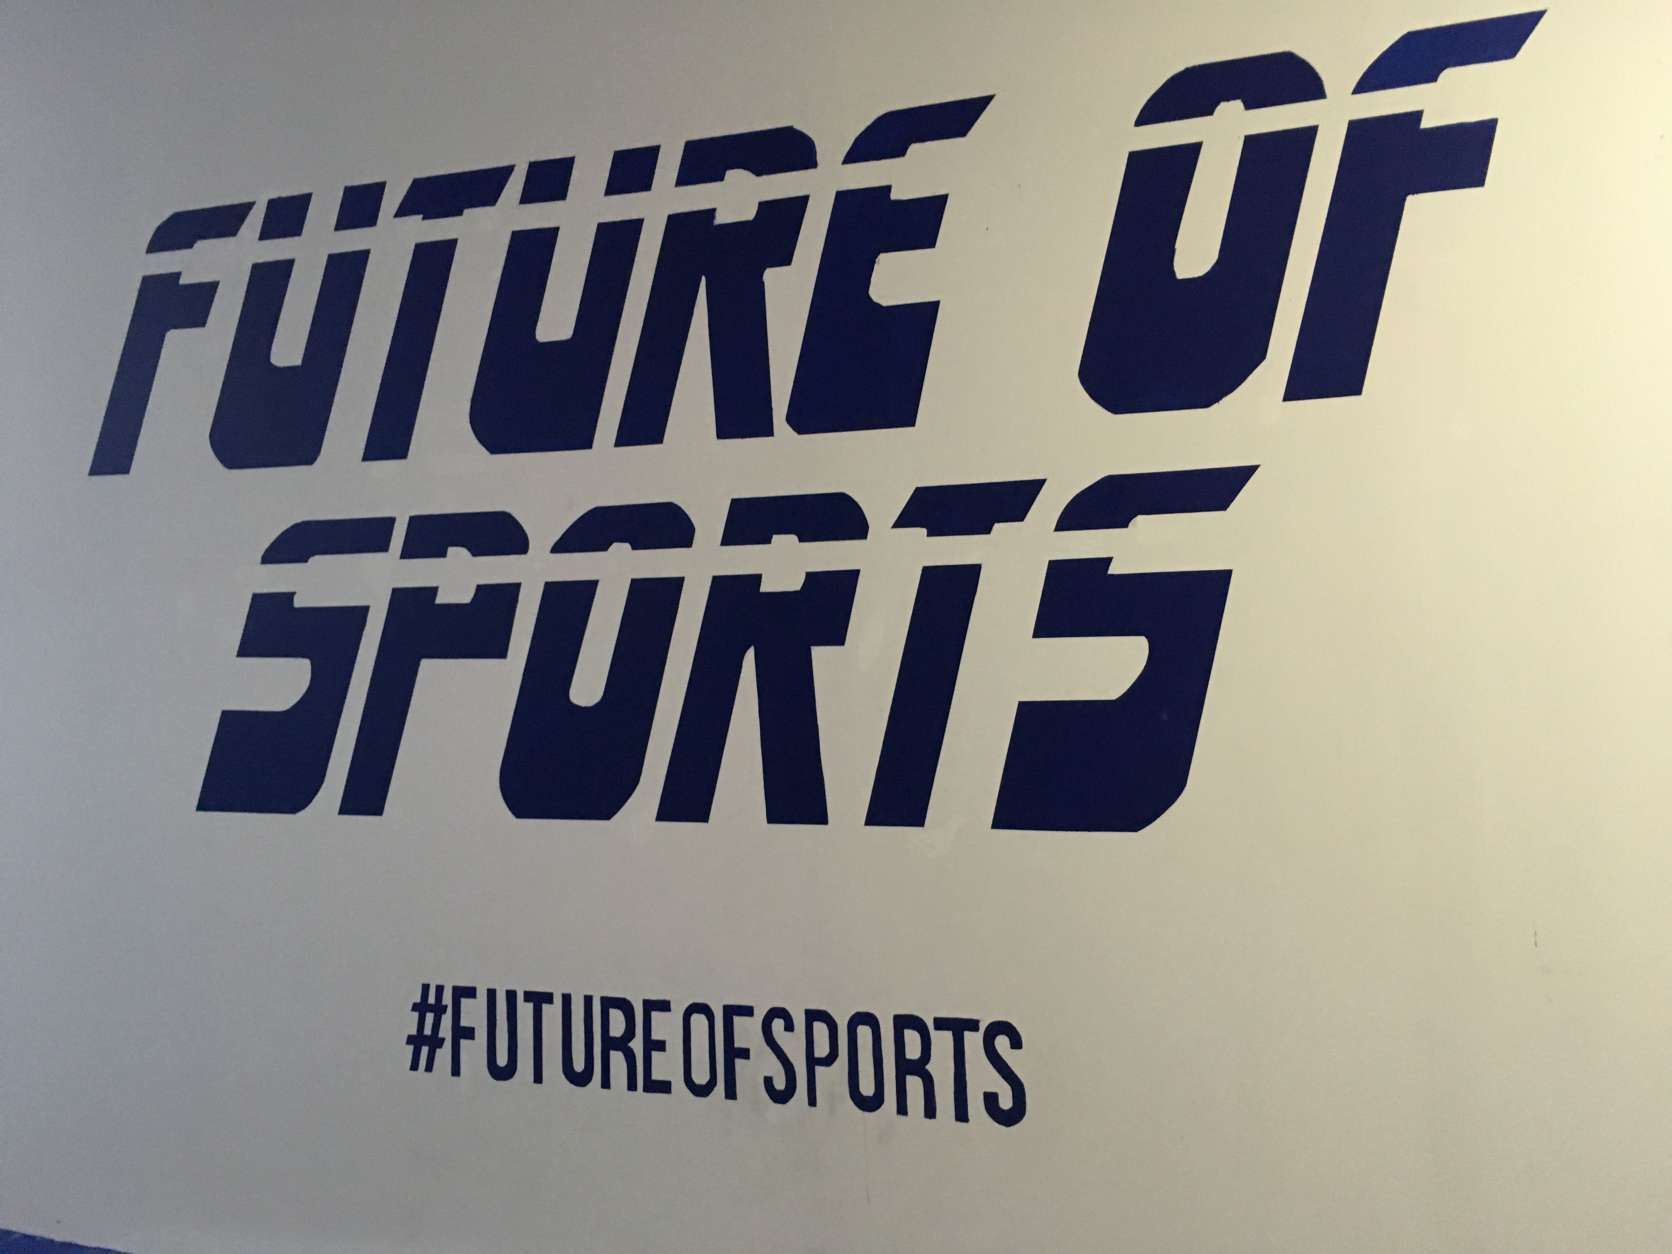 Nicole Pinedo, founder of Made in the District, showcases her new interactive pop-up exhibit "The Future of Sports" at 700 H St. NE through the end of November. (WTOP/Noah Frank)